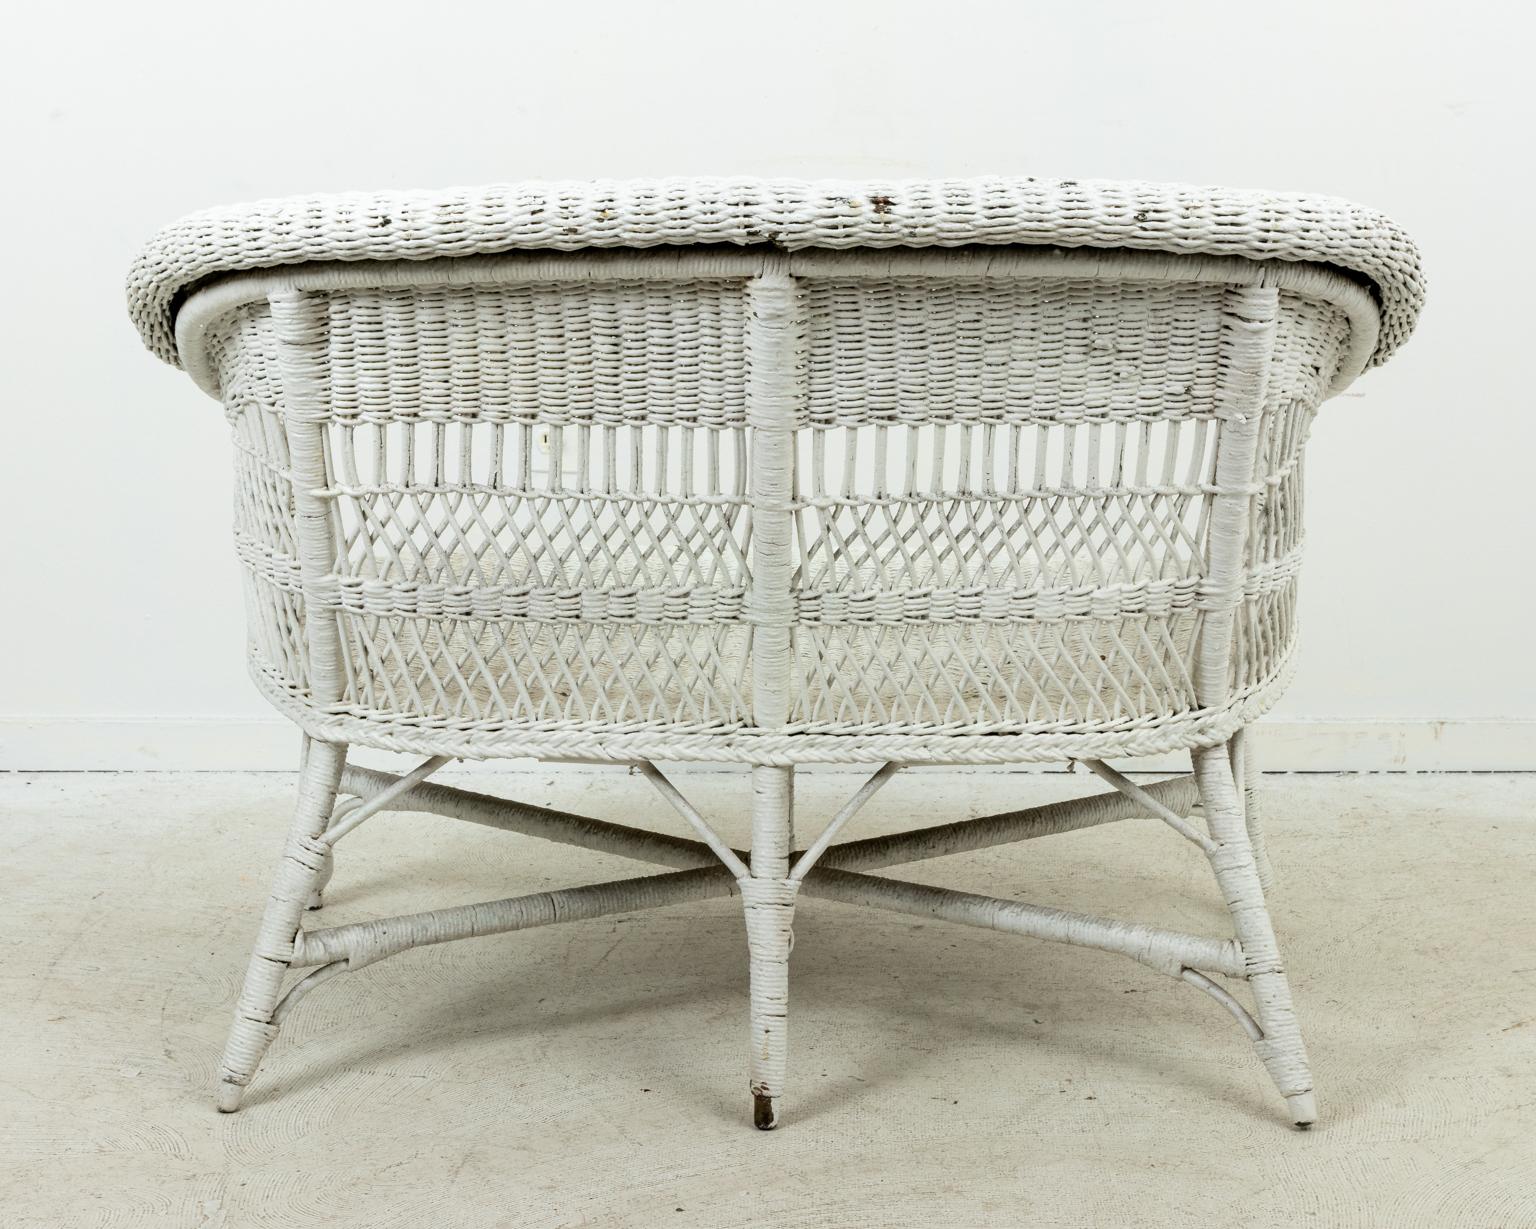 Vintage white painted wicker settee with woven lattice work detail, circa 1930s. Made in the United States. Please note of wear consistent with age including minor paint loss. There are a few area on the seat and back that show wear to the